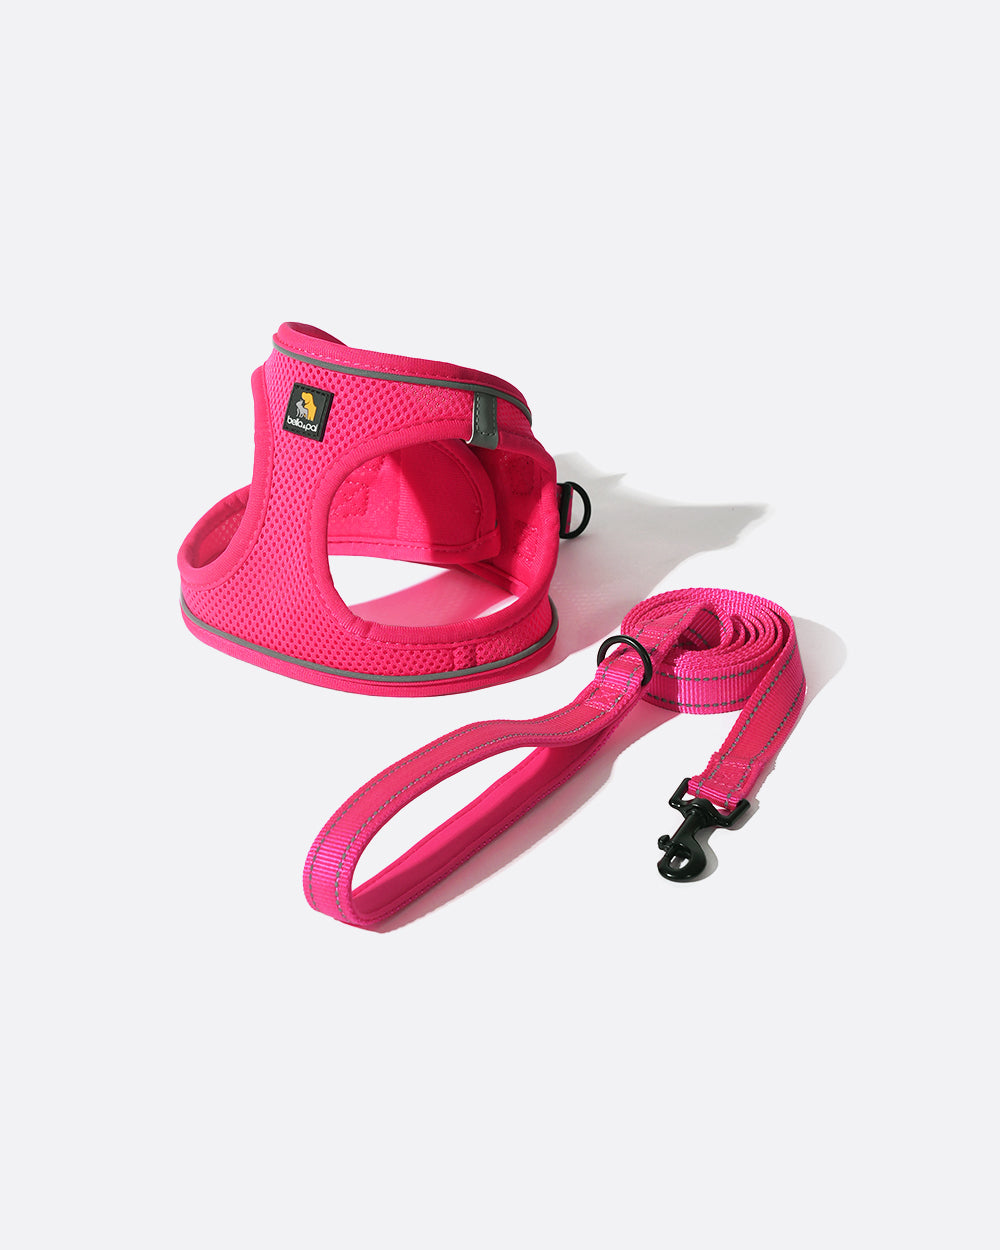 OxyMesh Step-in Harness and Leash Set in Barbie pink, a dog harness gear design for small dogs, such as Bichon Frise, Maltese, and Papillon. Available in XXS, XS, S, M, L